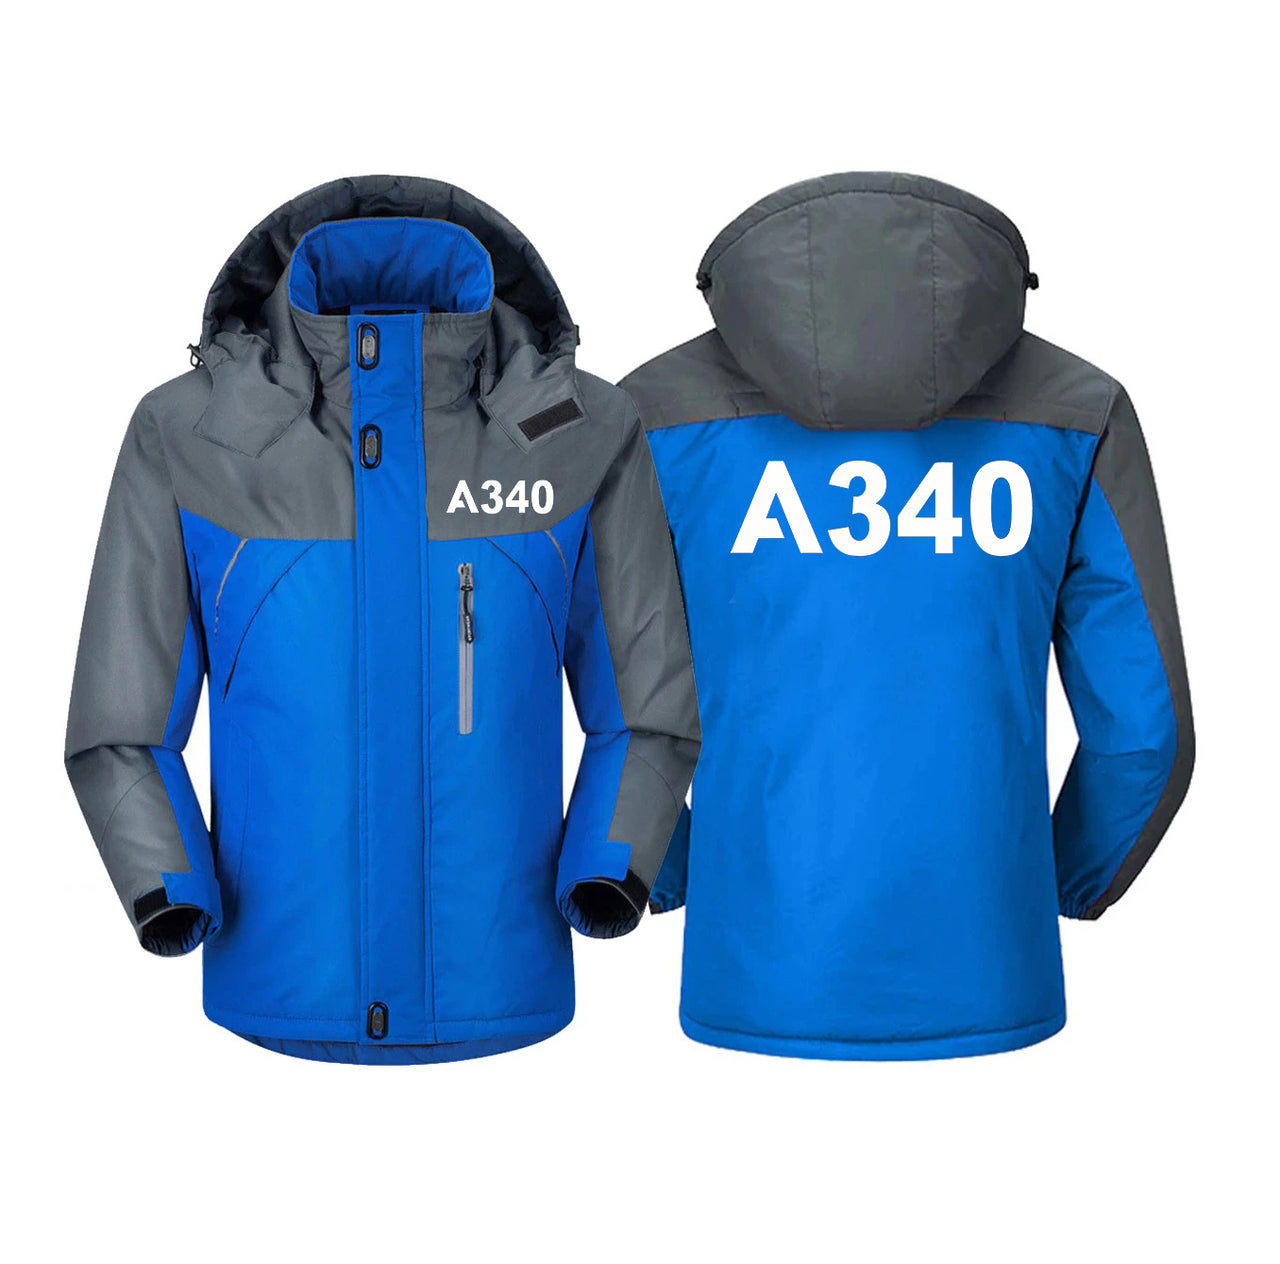 A340 Flat Text Designed Thick Winter Jackets